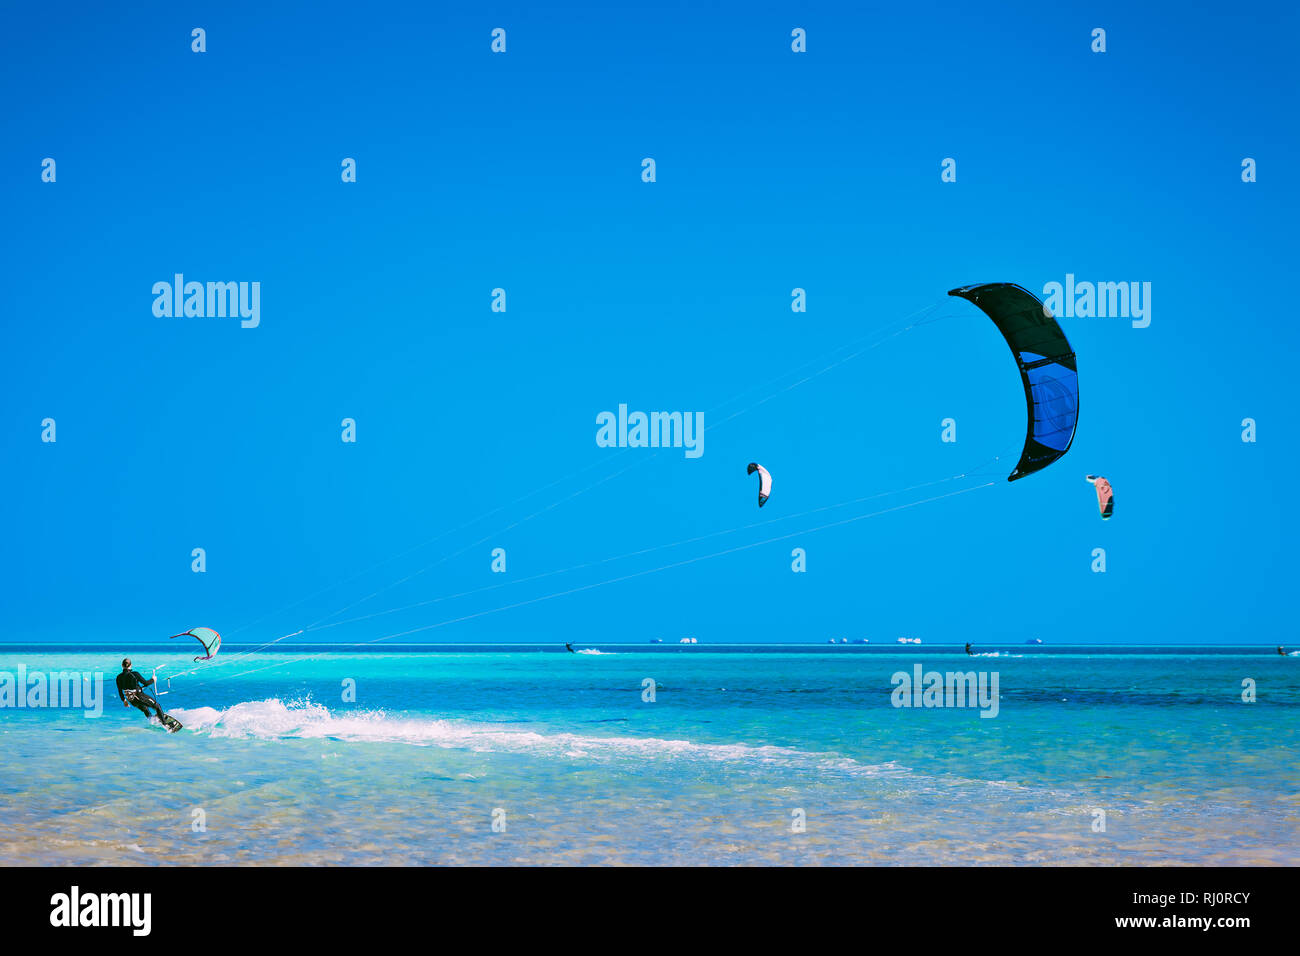 Egypt, Hurghada - 30 November, 2017: The kiter gliding over the Red sea surface. The active leisure. Picturesque marine scenery. The popular tourist water attraction. The outdoor sport activity. Stock Photo